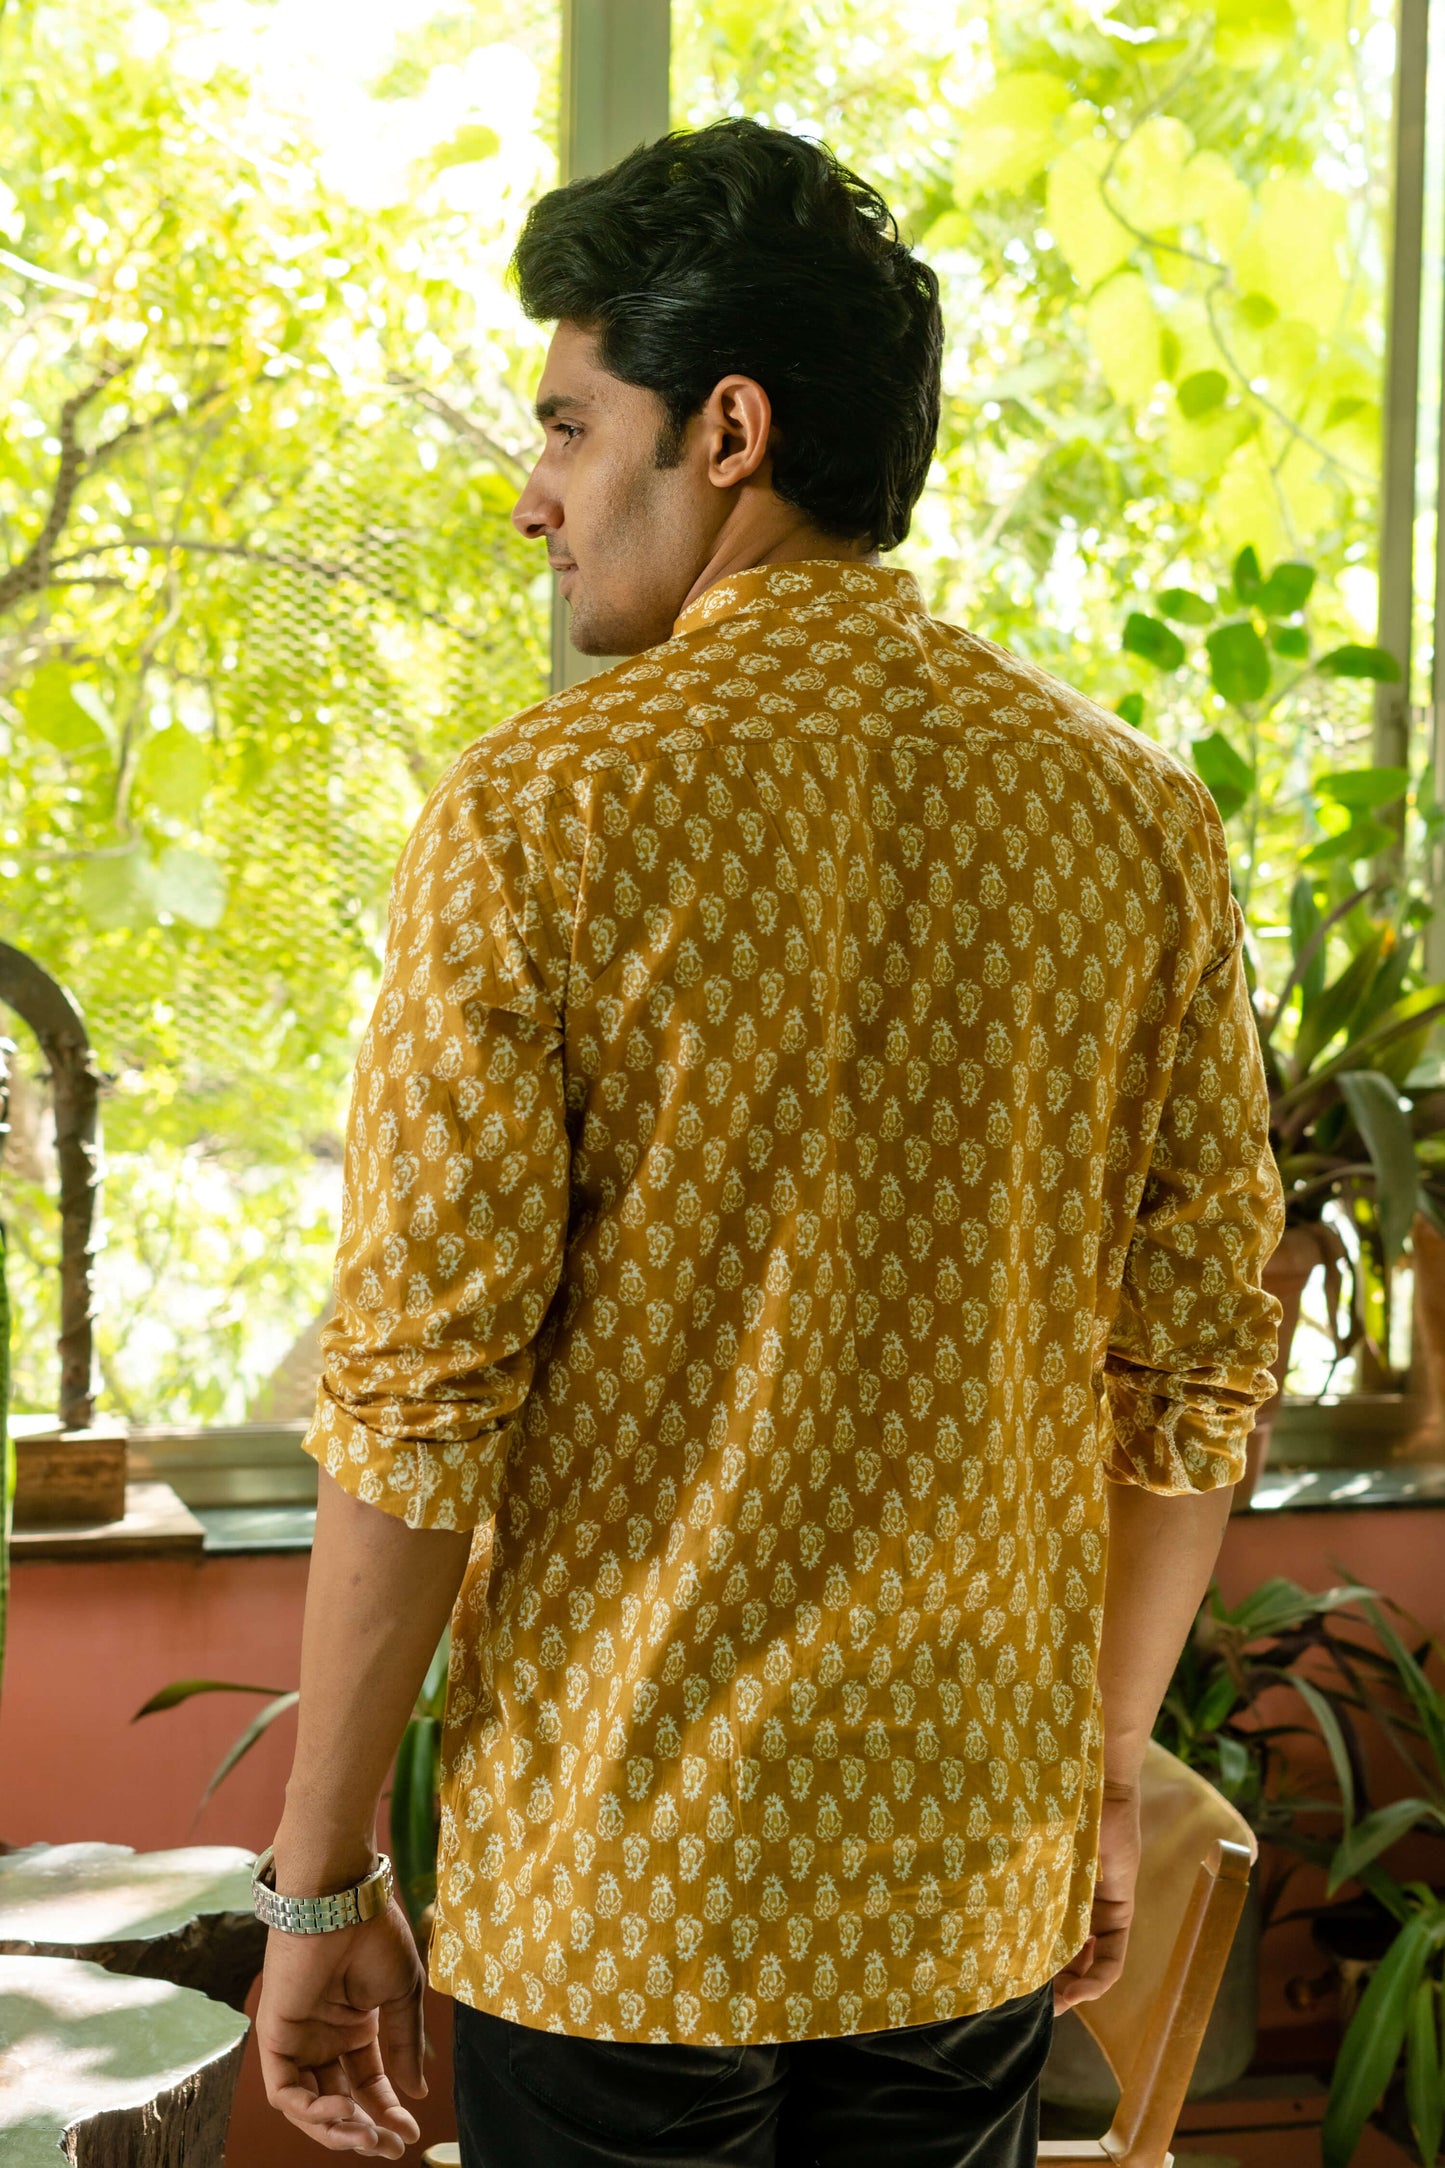 The Mustard Color Short Kurta With White Butti Print